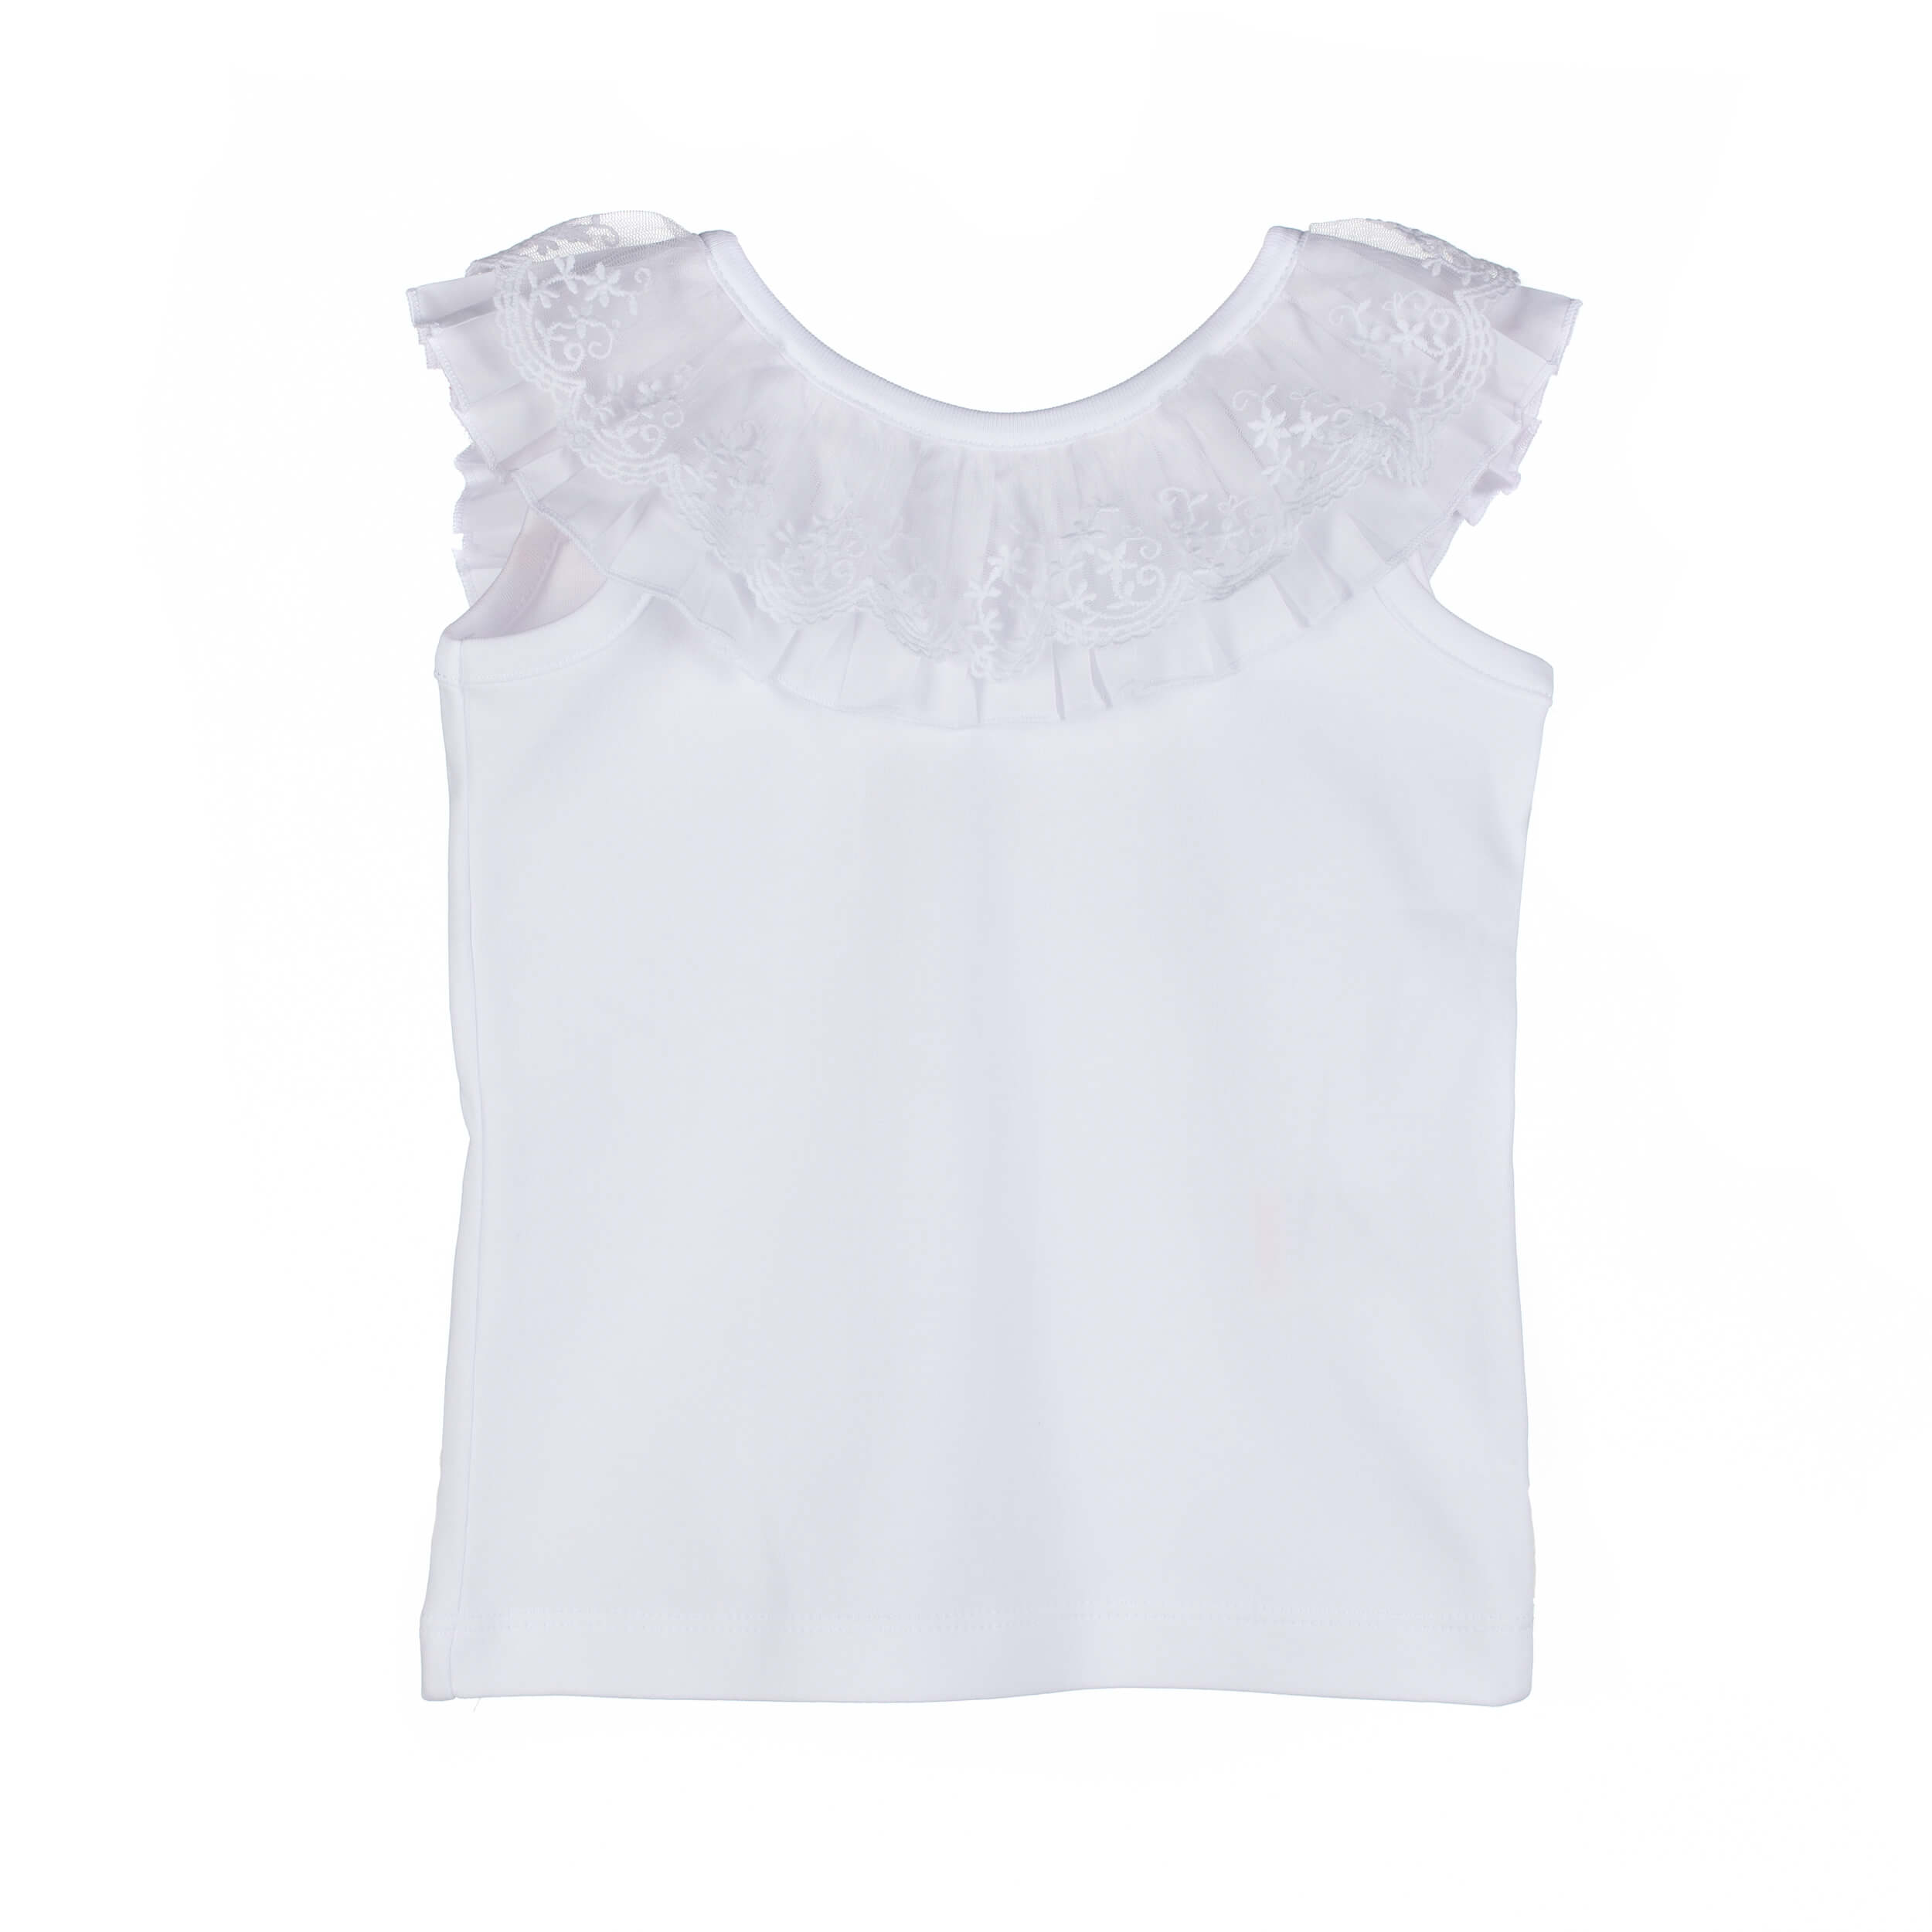 sleeveless girls top with lace 2